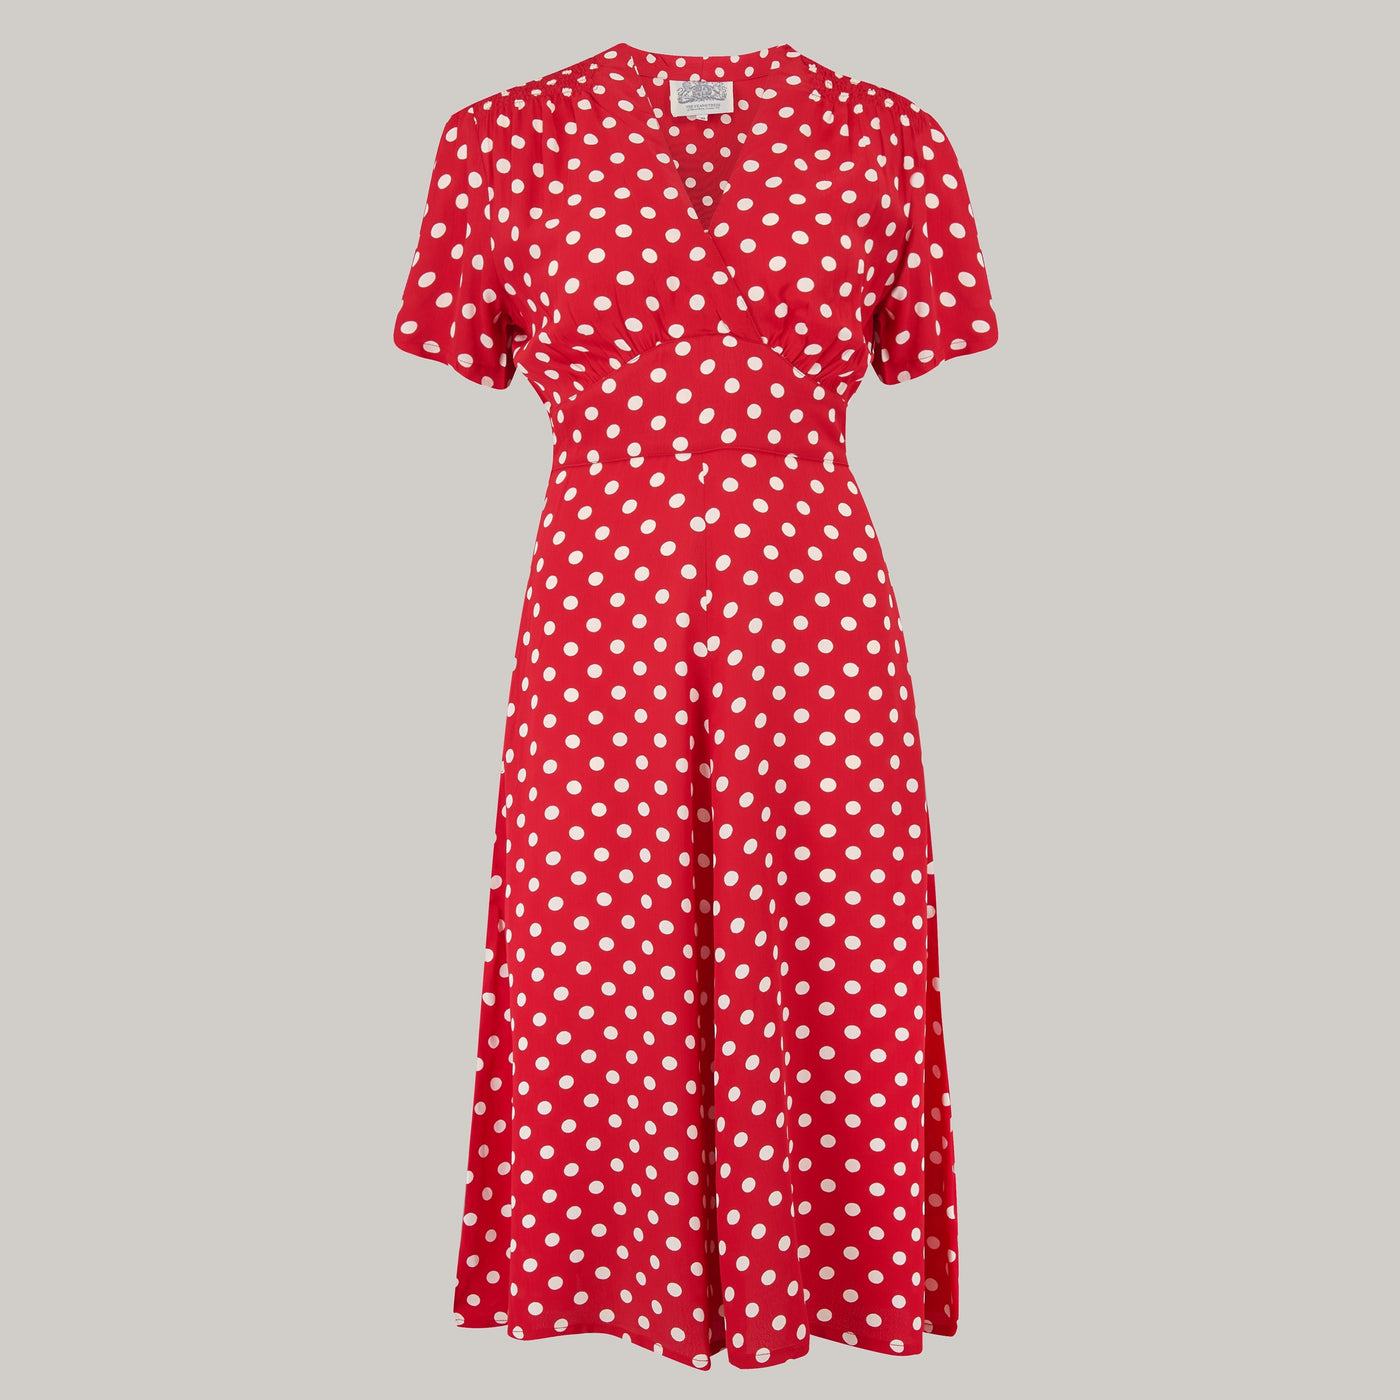 Crawford 1940s Dress in Red Spot